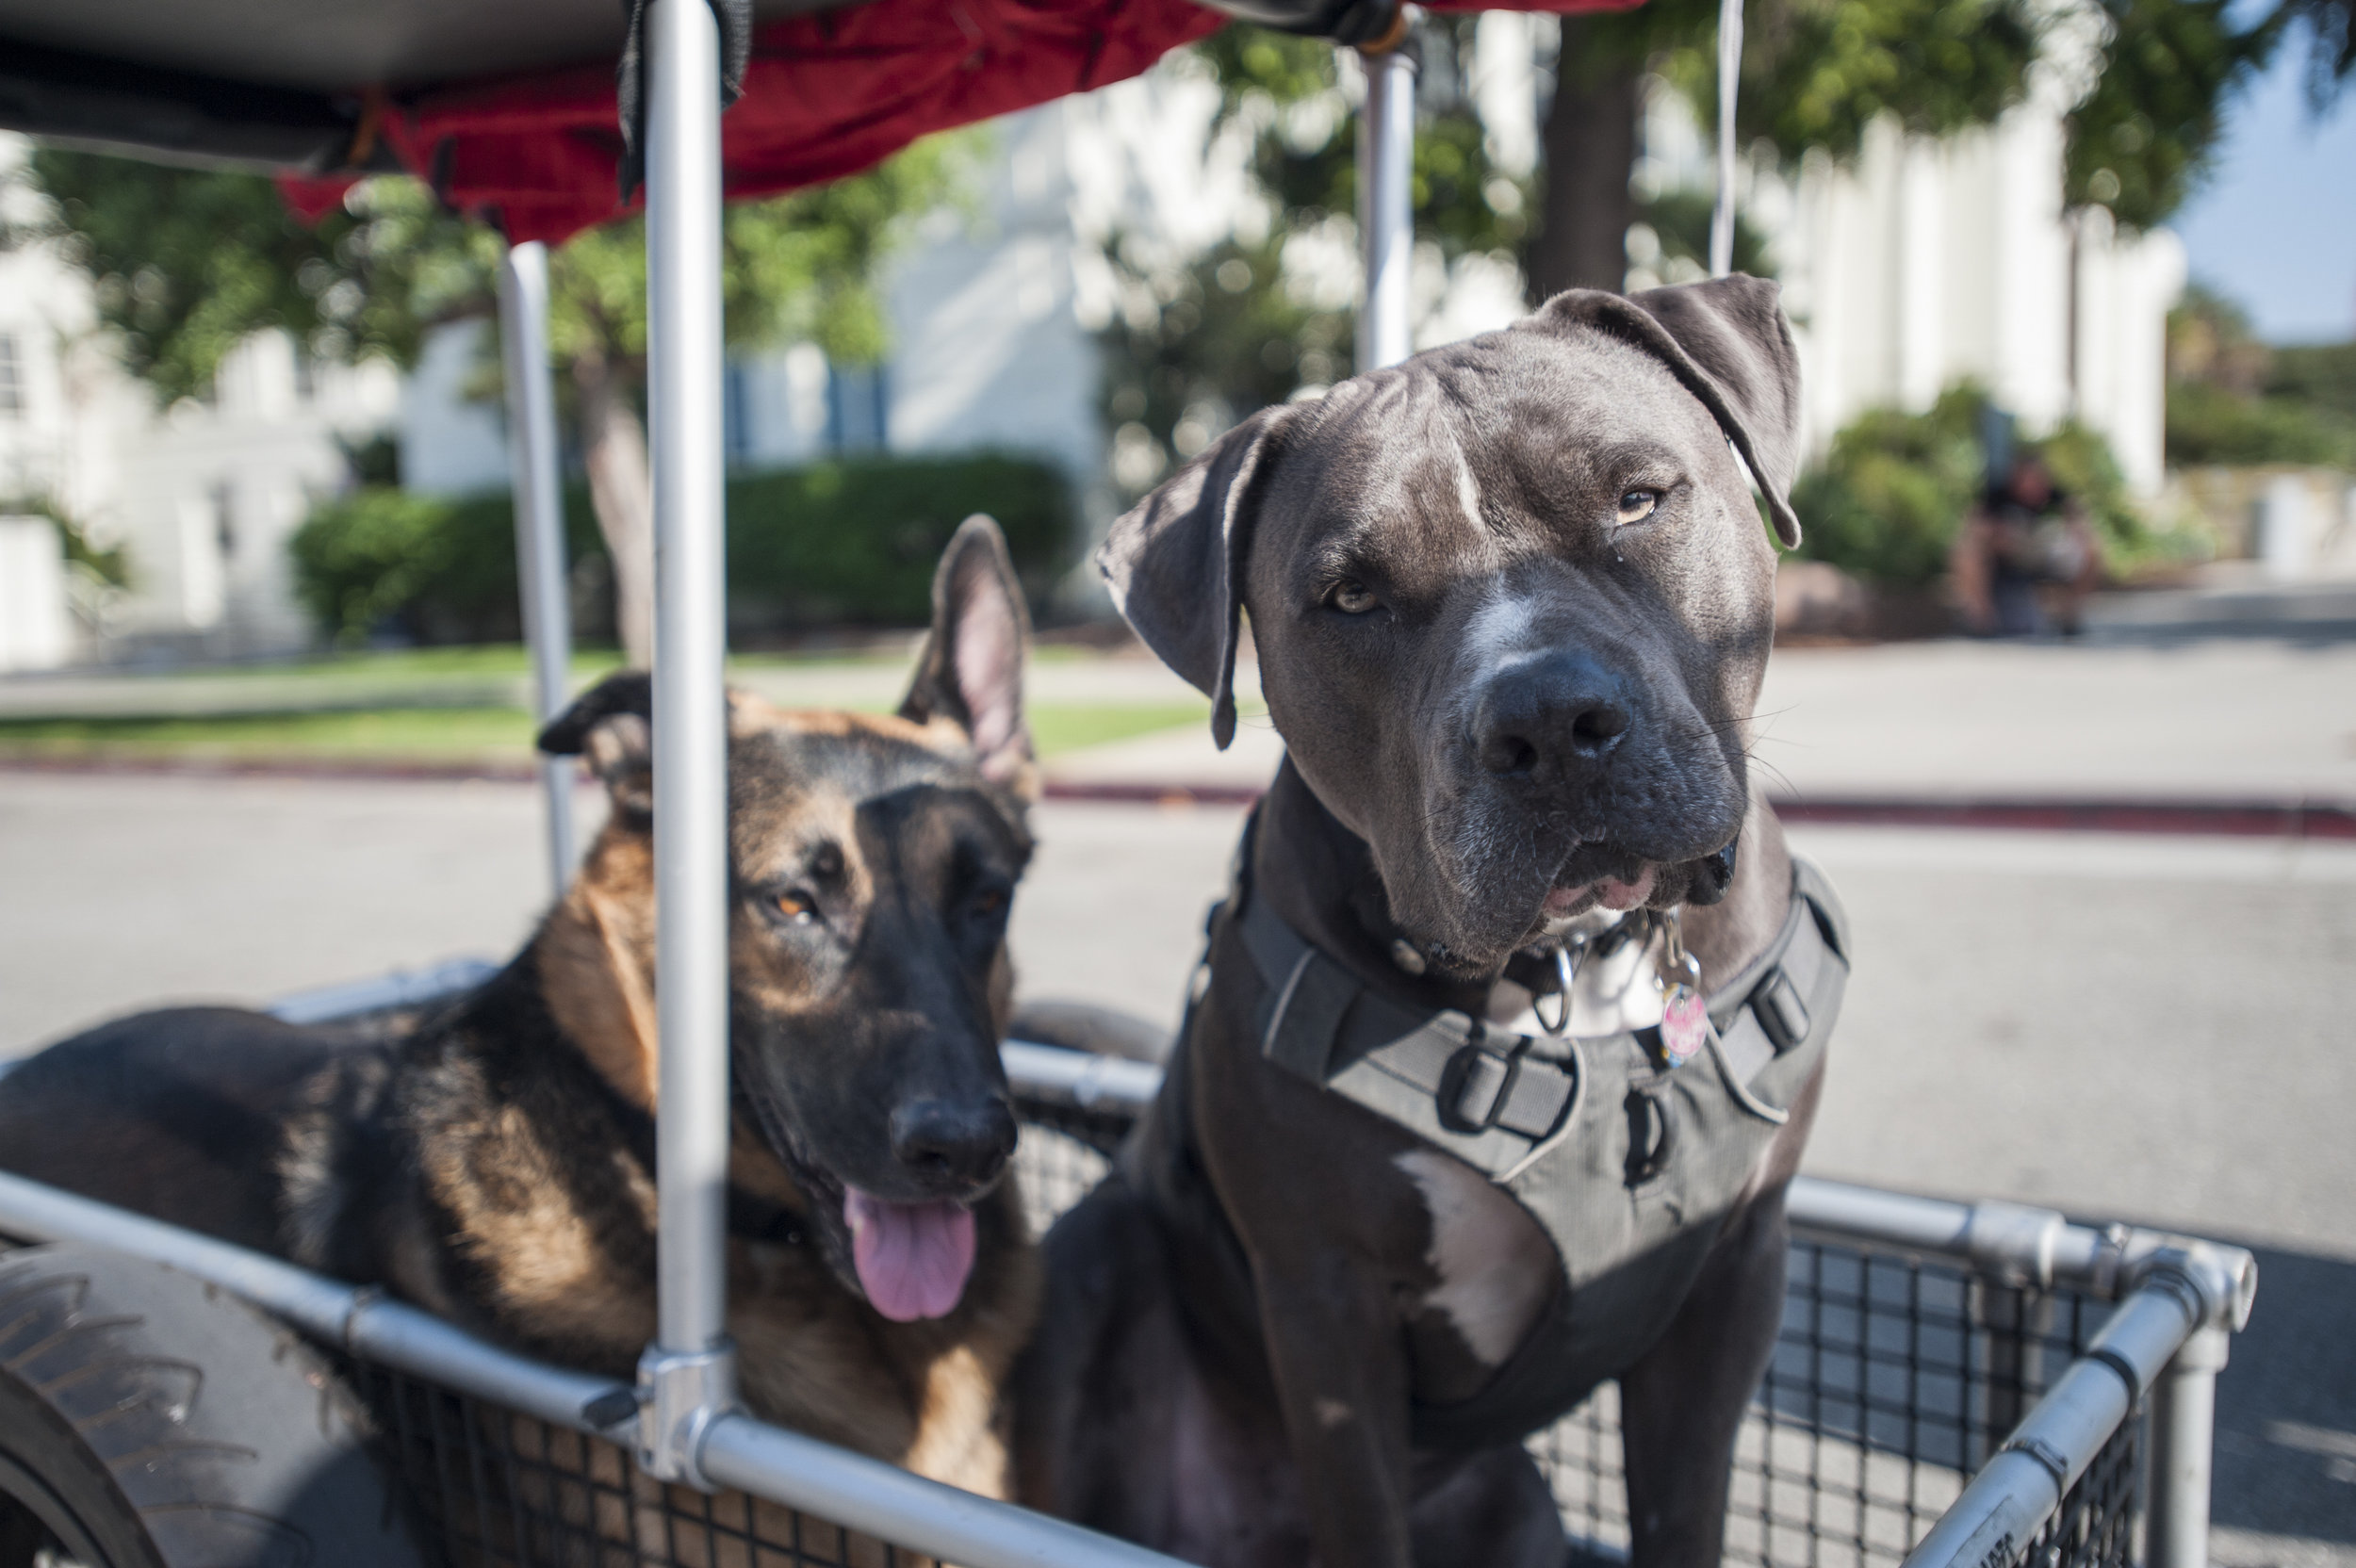  COAST provided many dogs and dog owners a safe environment to roam around at in streets that would normally be congested with motor vehicles. The second ever COAST was held in Santa Monica, Calif. on October 1, 2017. (Photo by: Justin Han/Corsair St